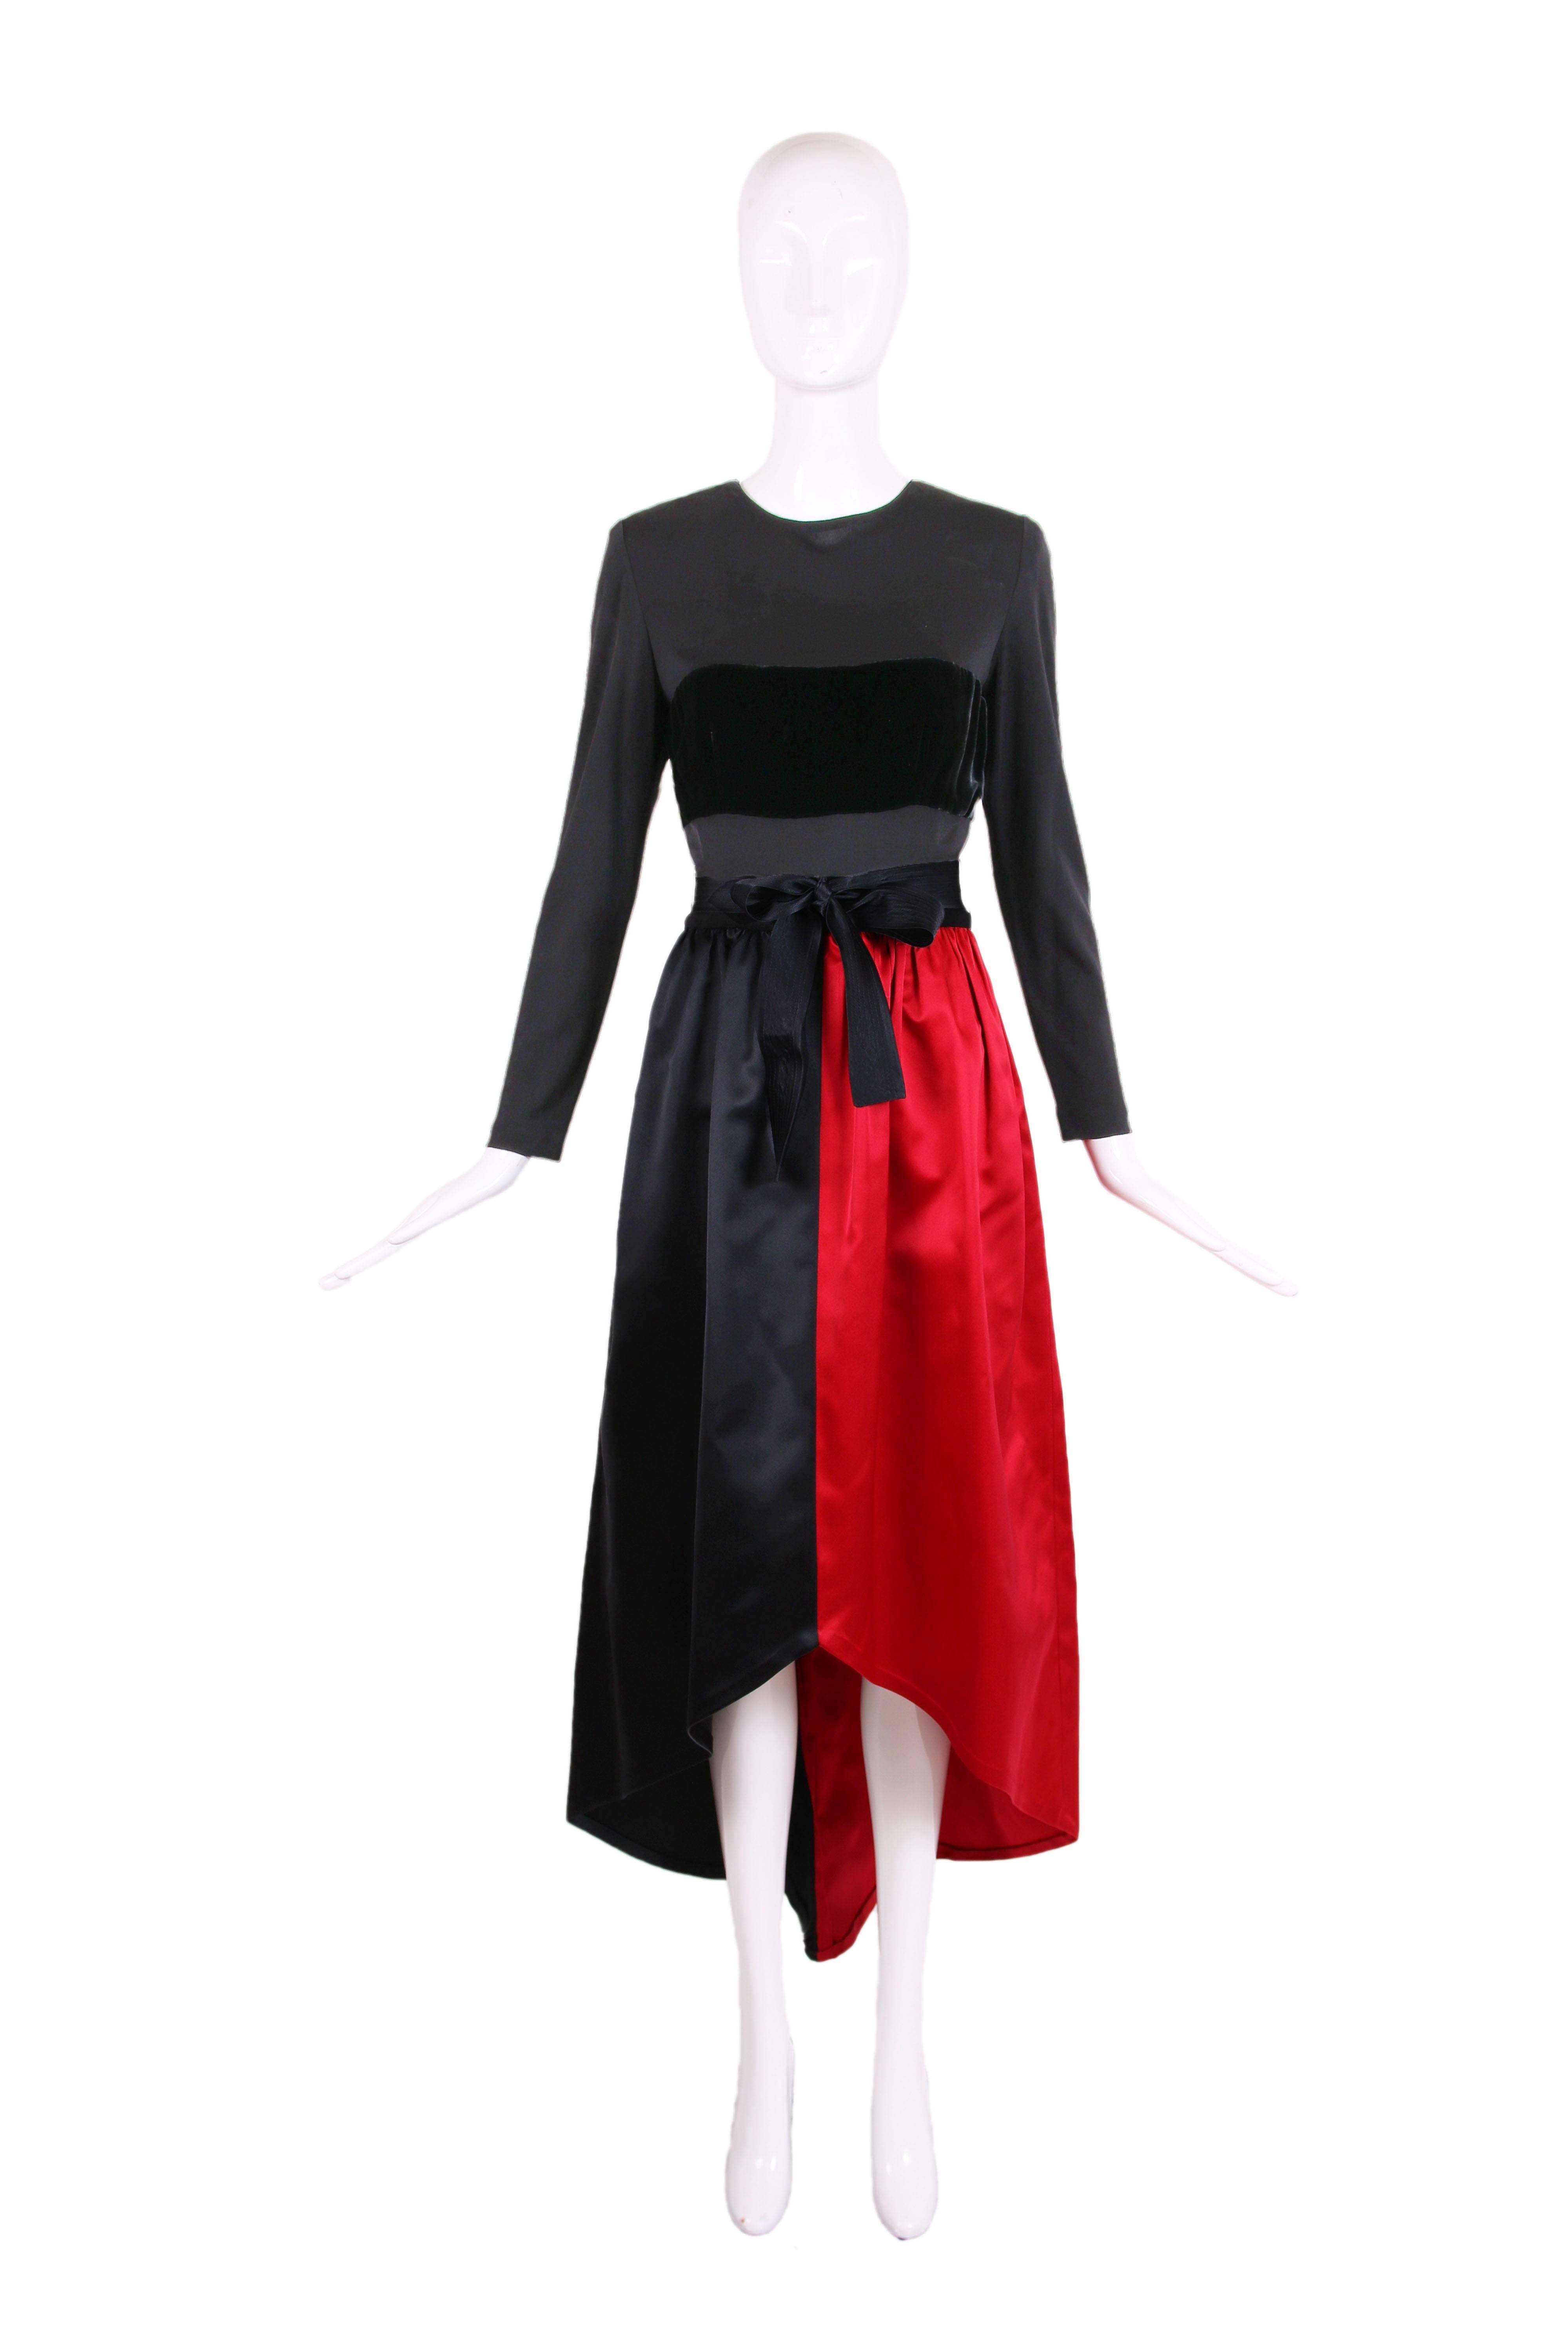 Vintage Bill Blass evening gown with black long sleeved illusion bodice, black velvet modesty band at bust and a skirt divided evenly down the middle into red and black satin panels. Comes with black satin belt that is 1.5